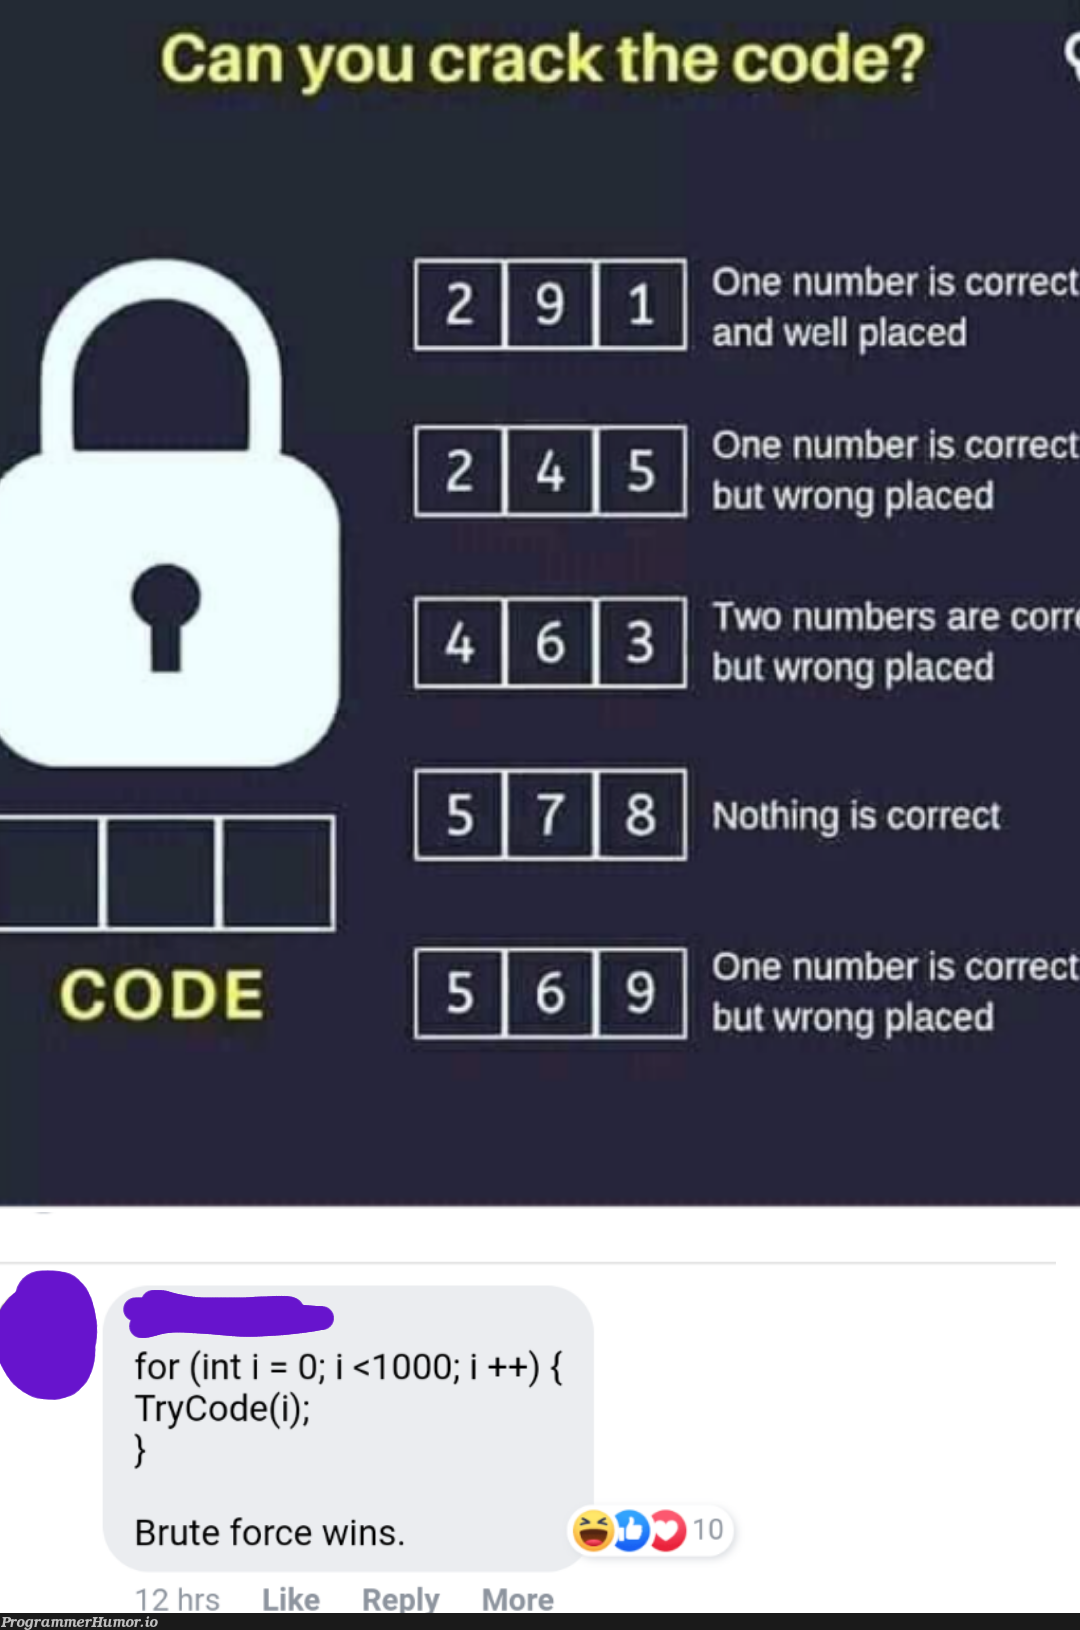 Can You Crack the Lock's Code?